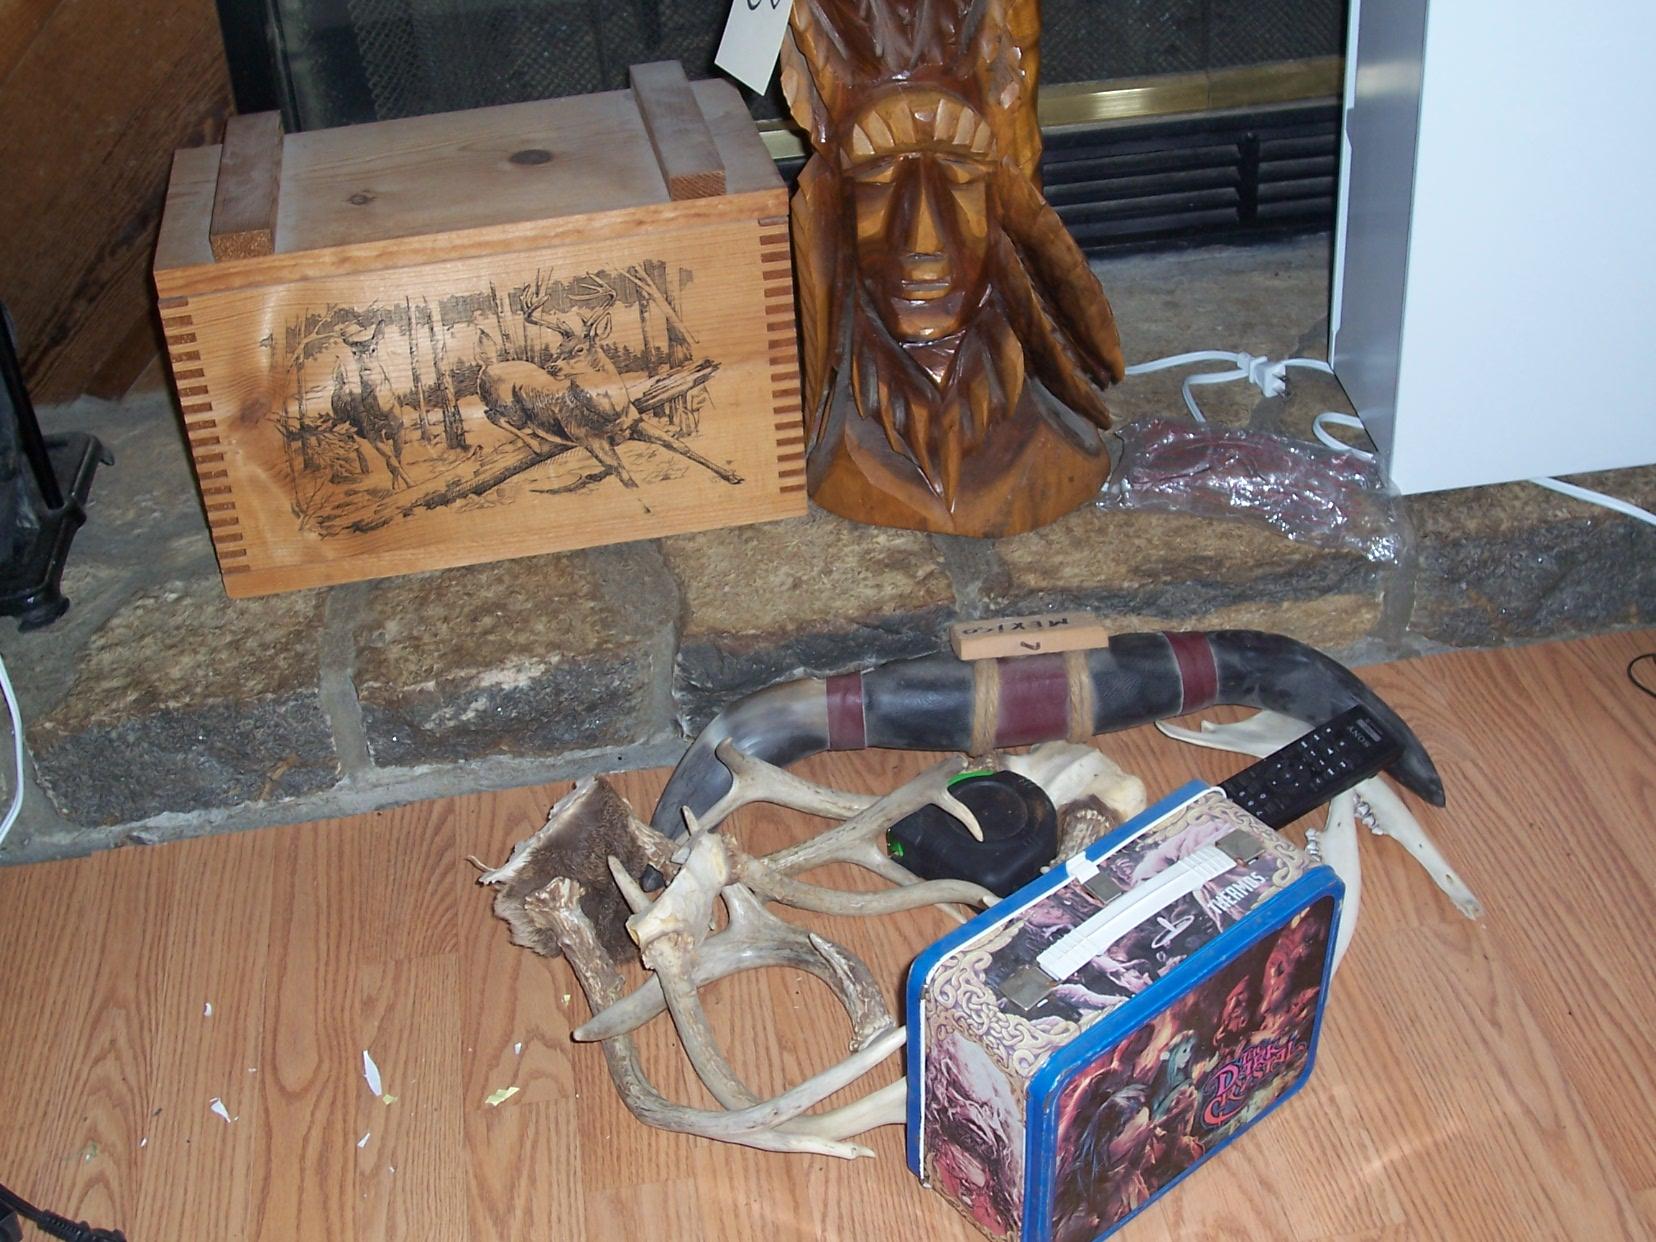 Wooden box, wooden carved Indian head and antlers